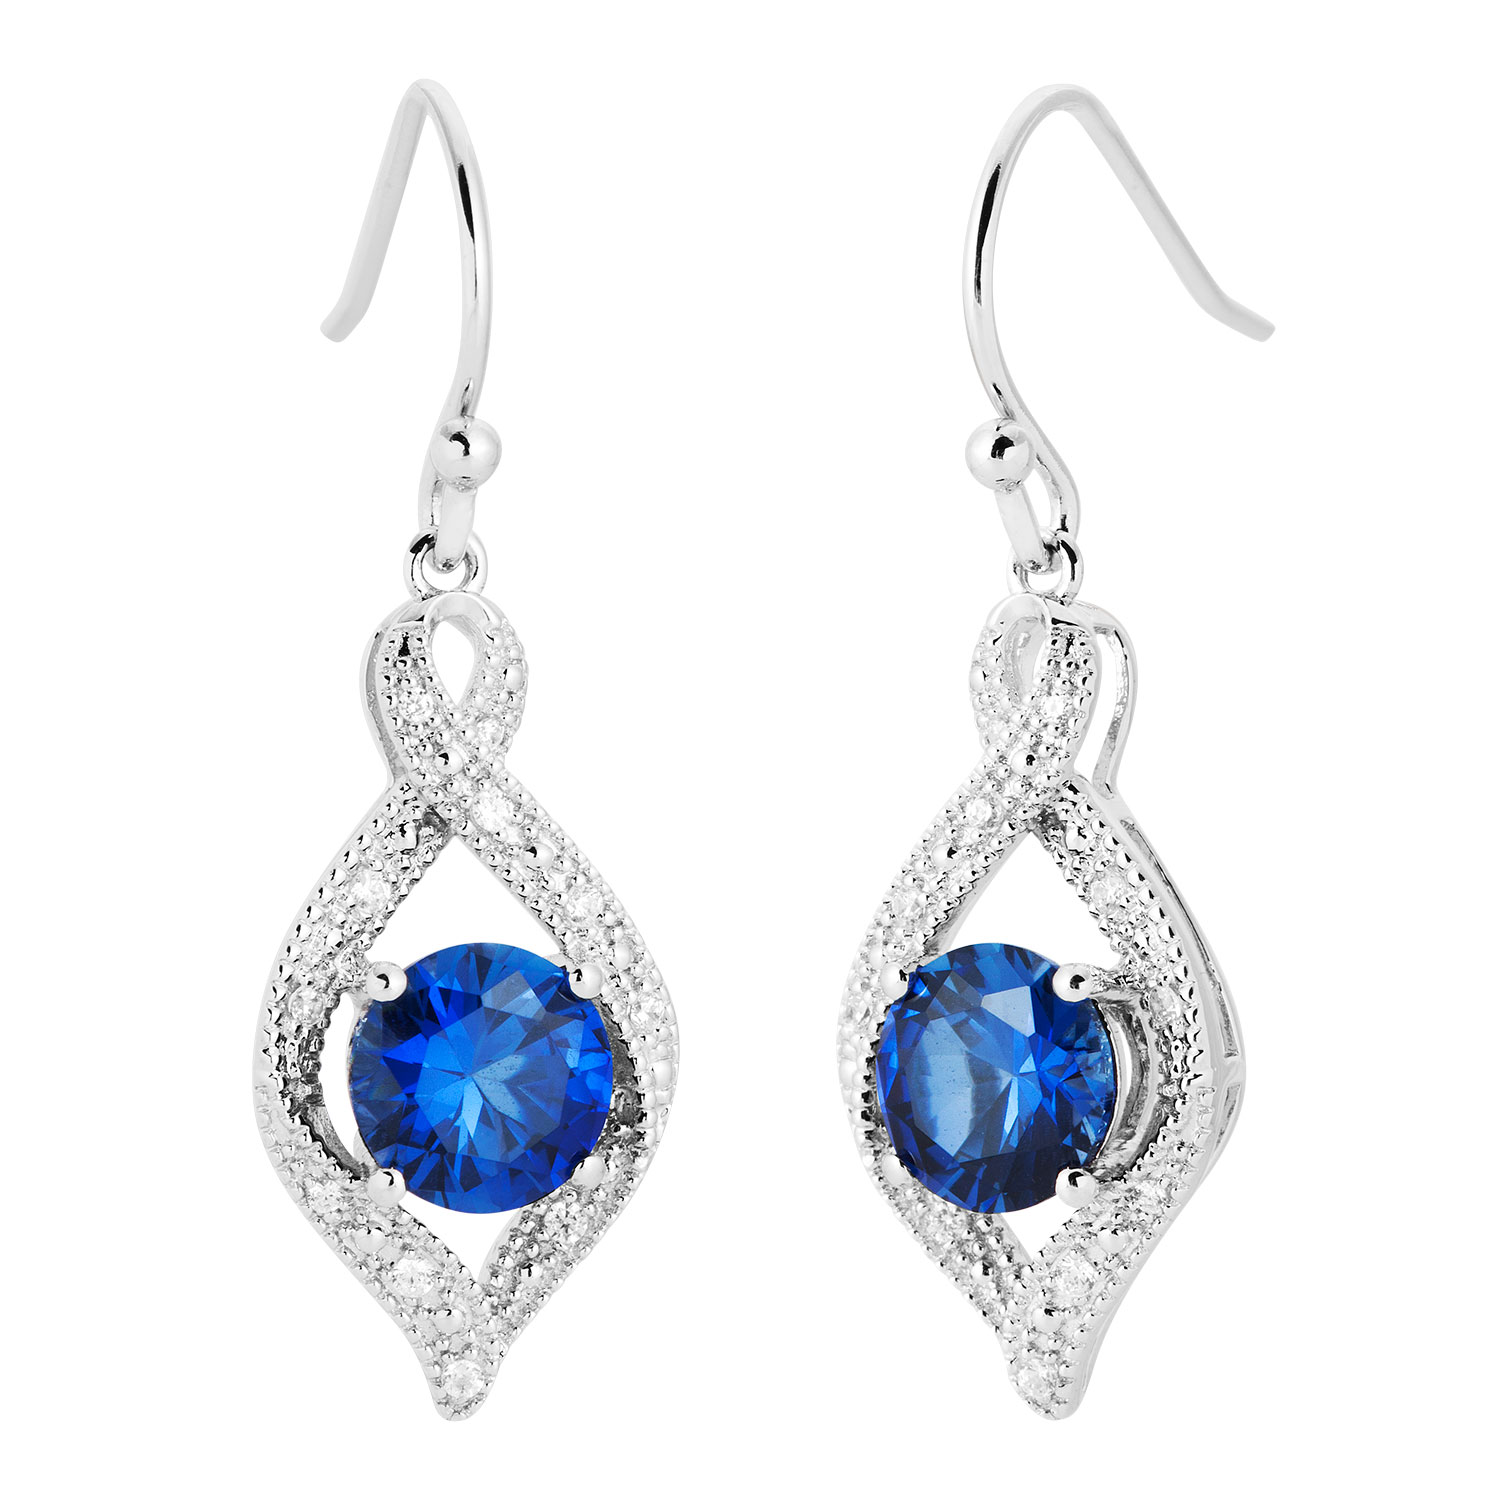 Round Blue and White CZ Earrings, Rhodium Plated Sterling Silver